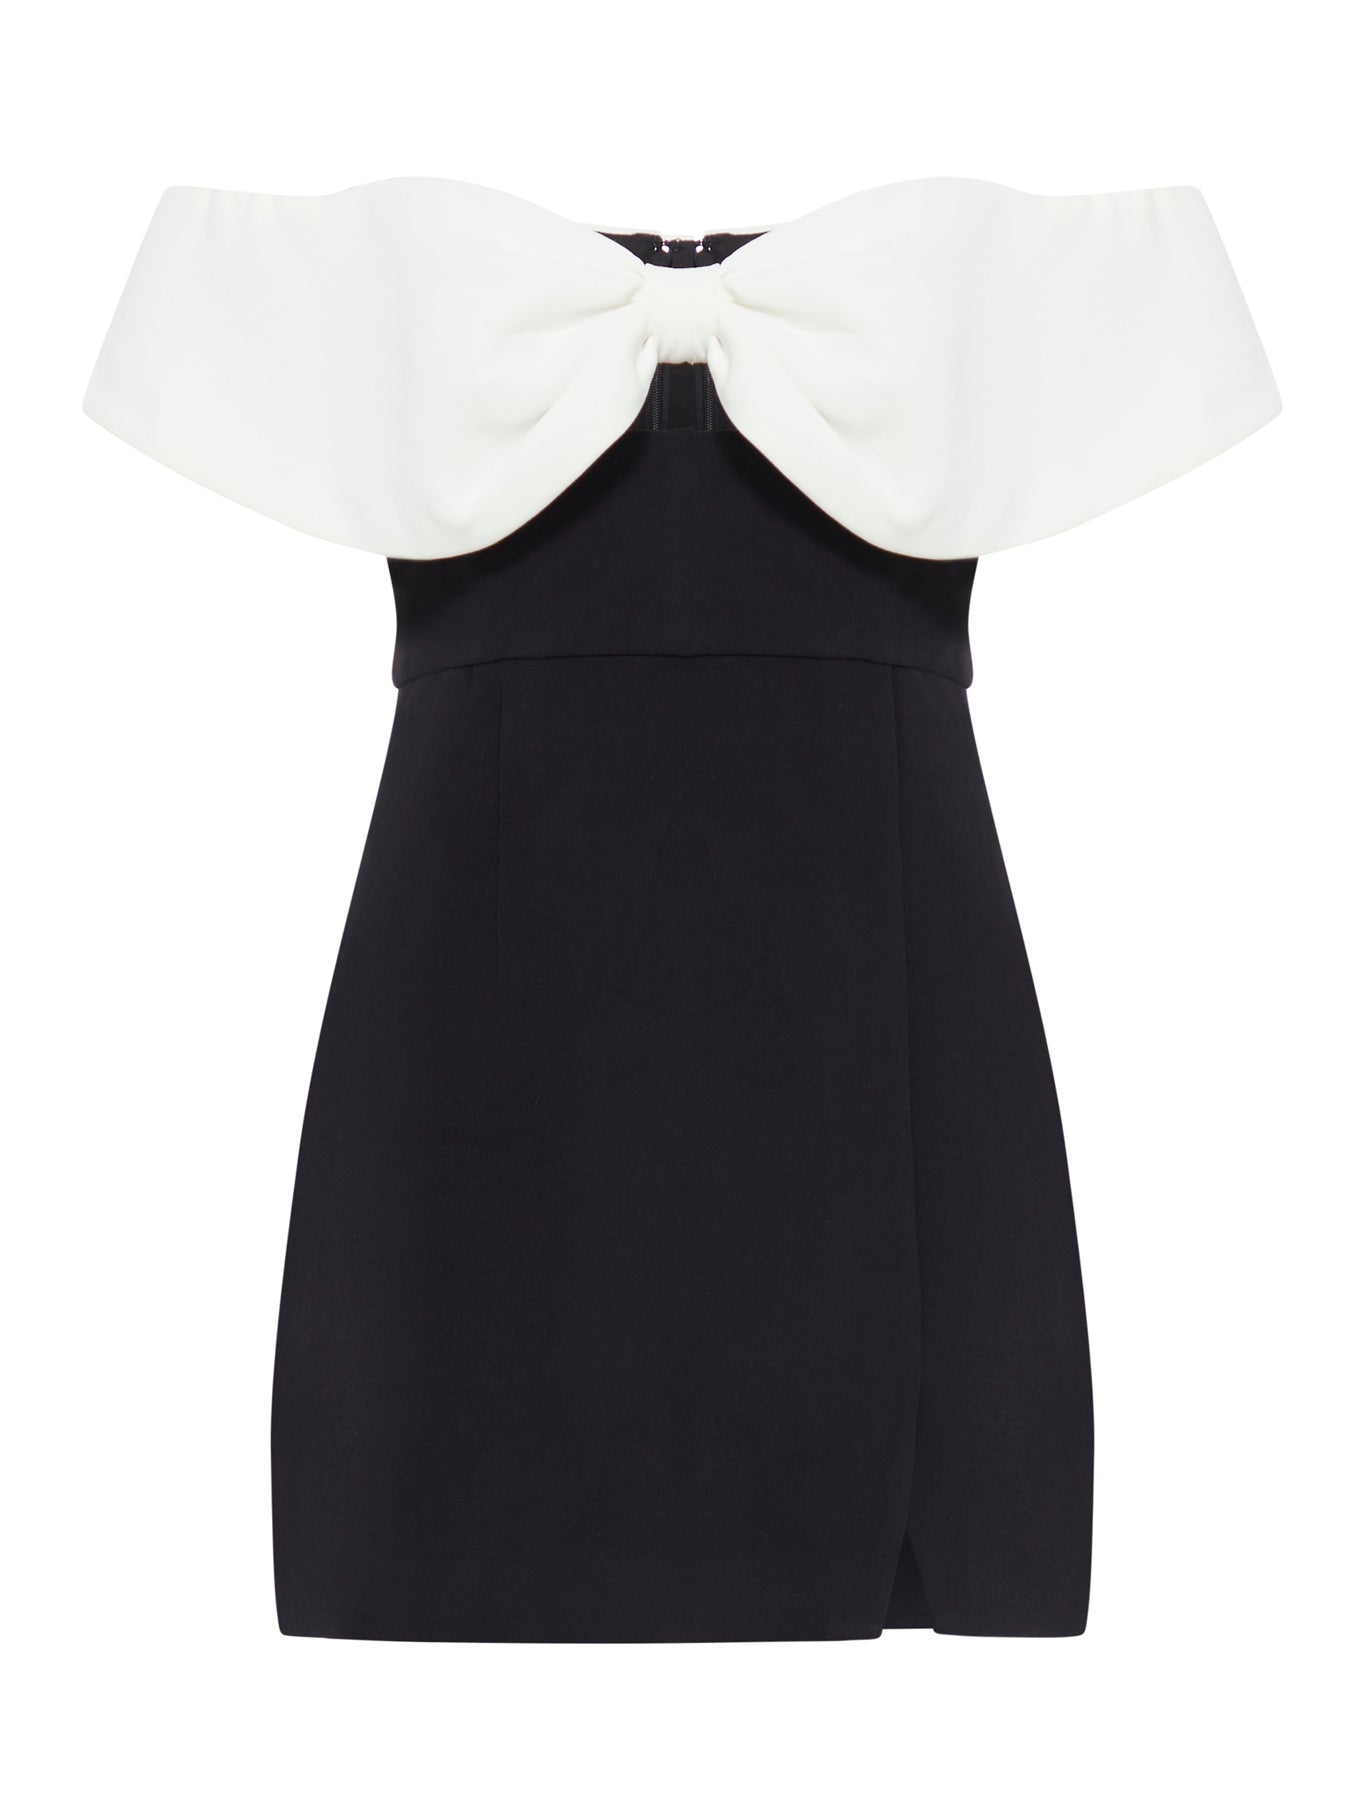 two-tone dress with bow